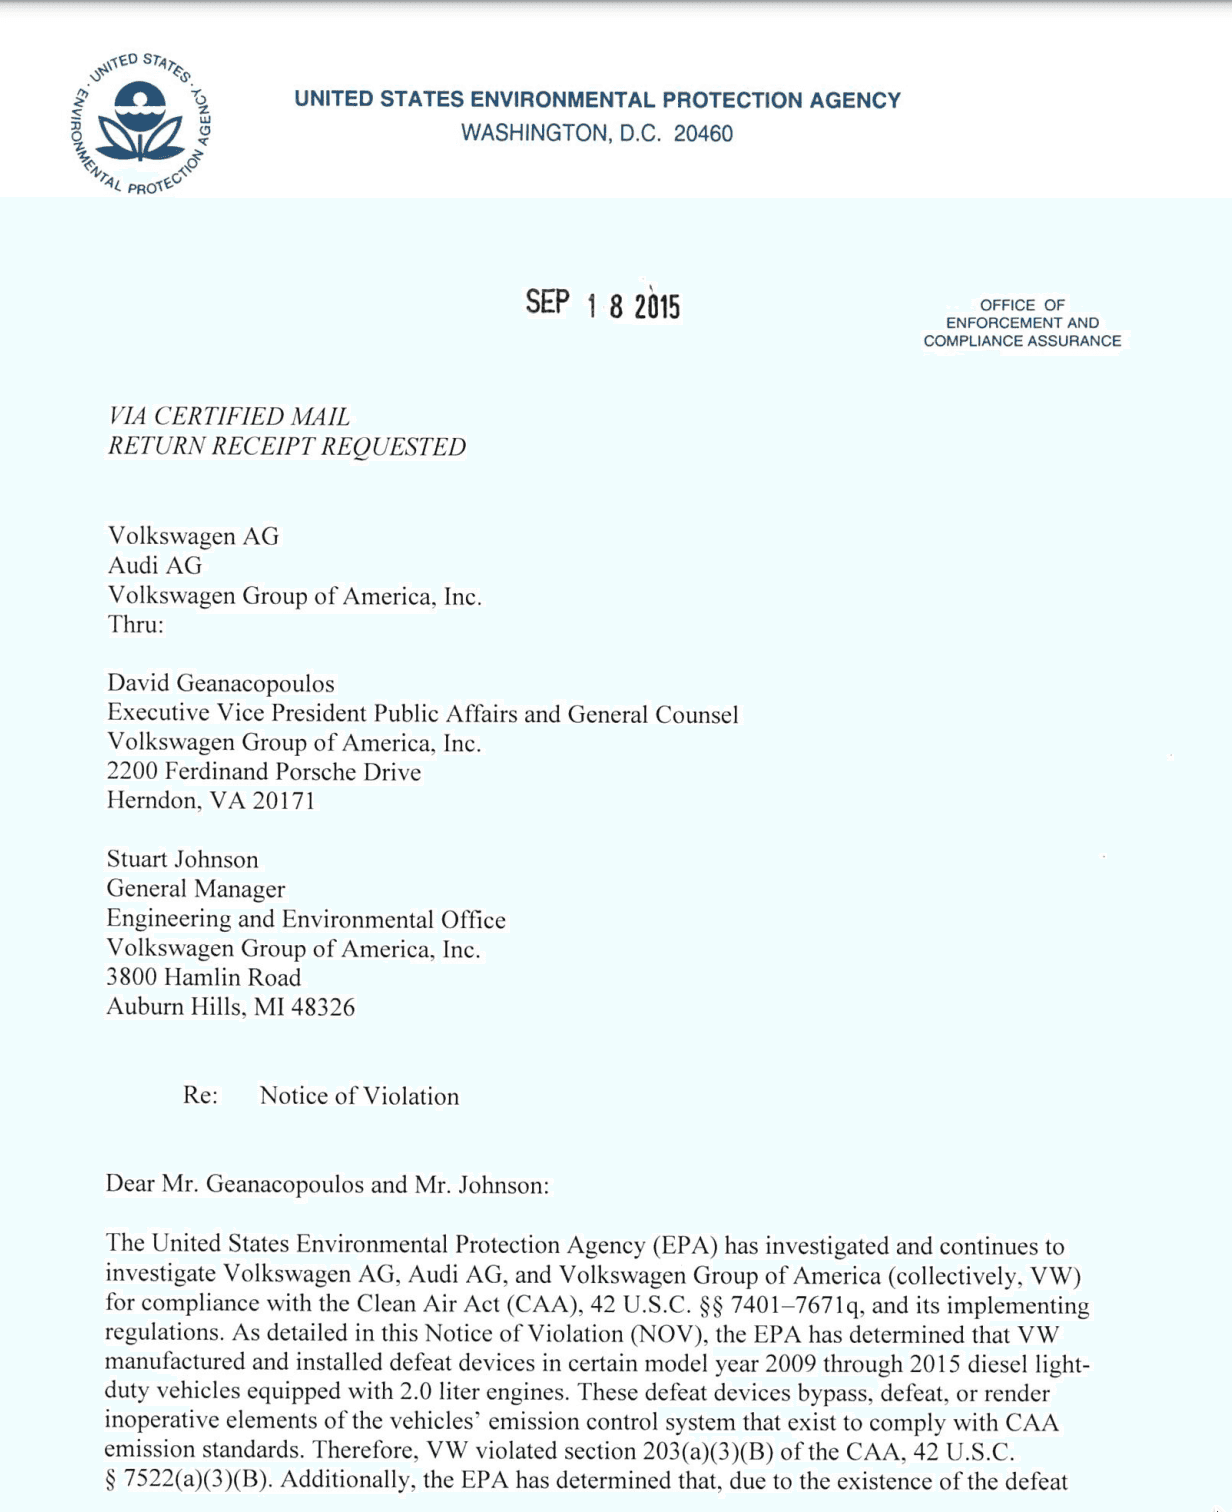 Letter from United States Environmental Protection agency notifying Volkswagen of violation